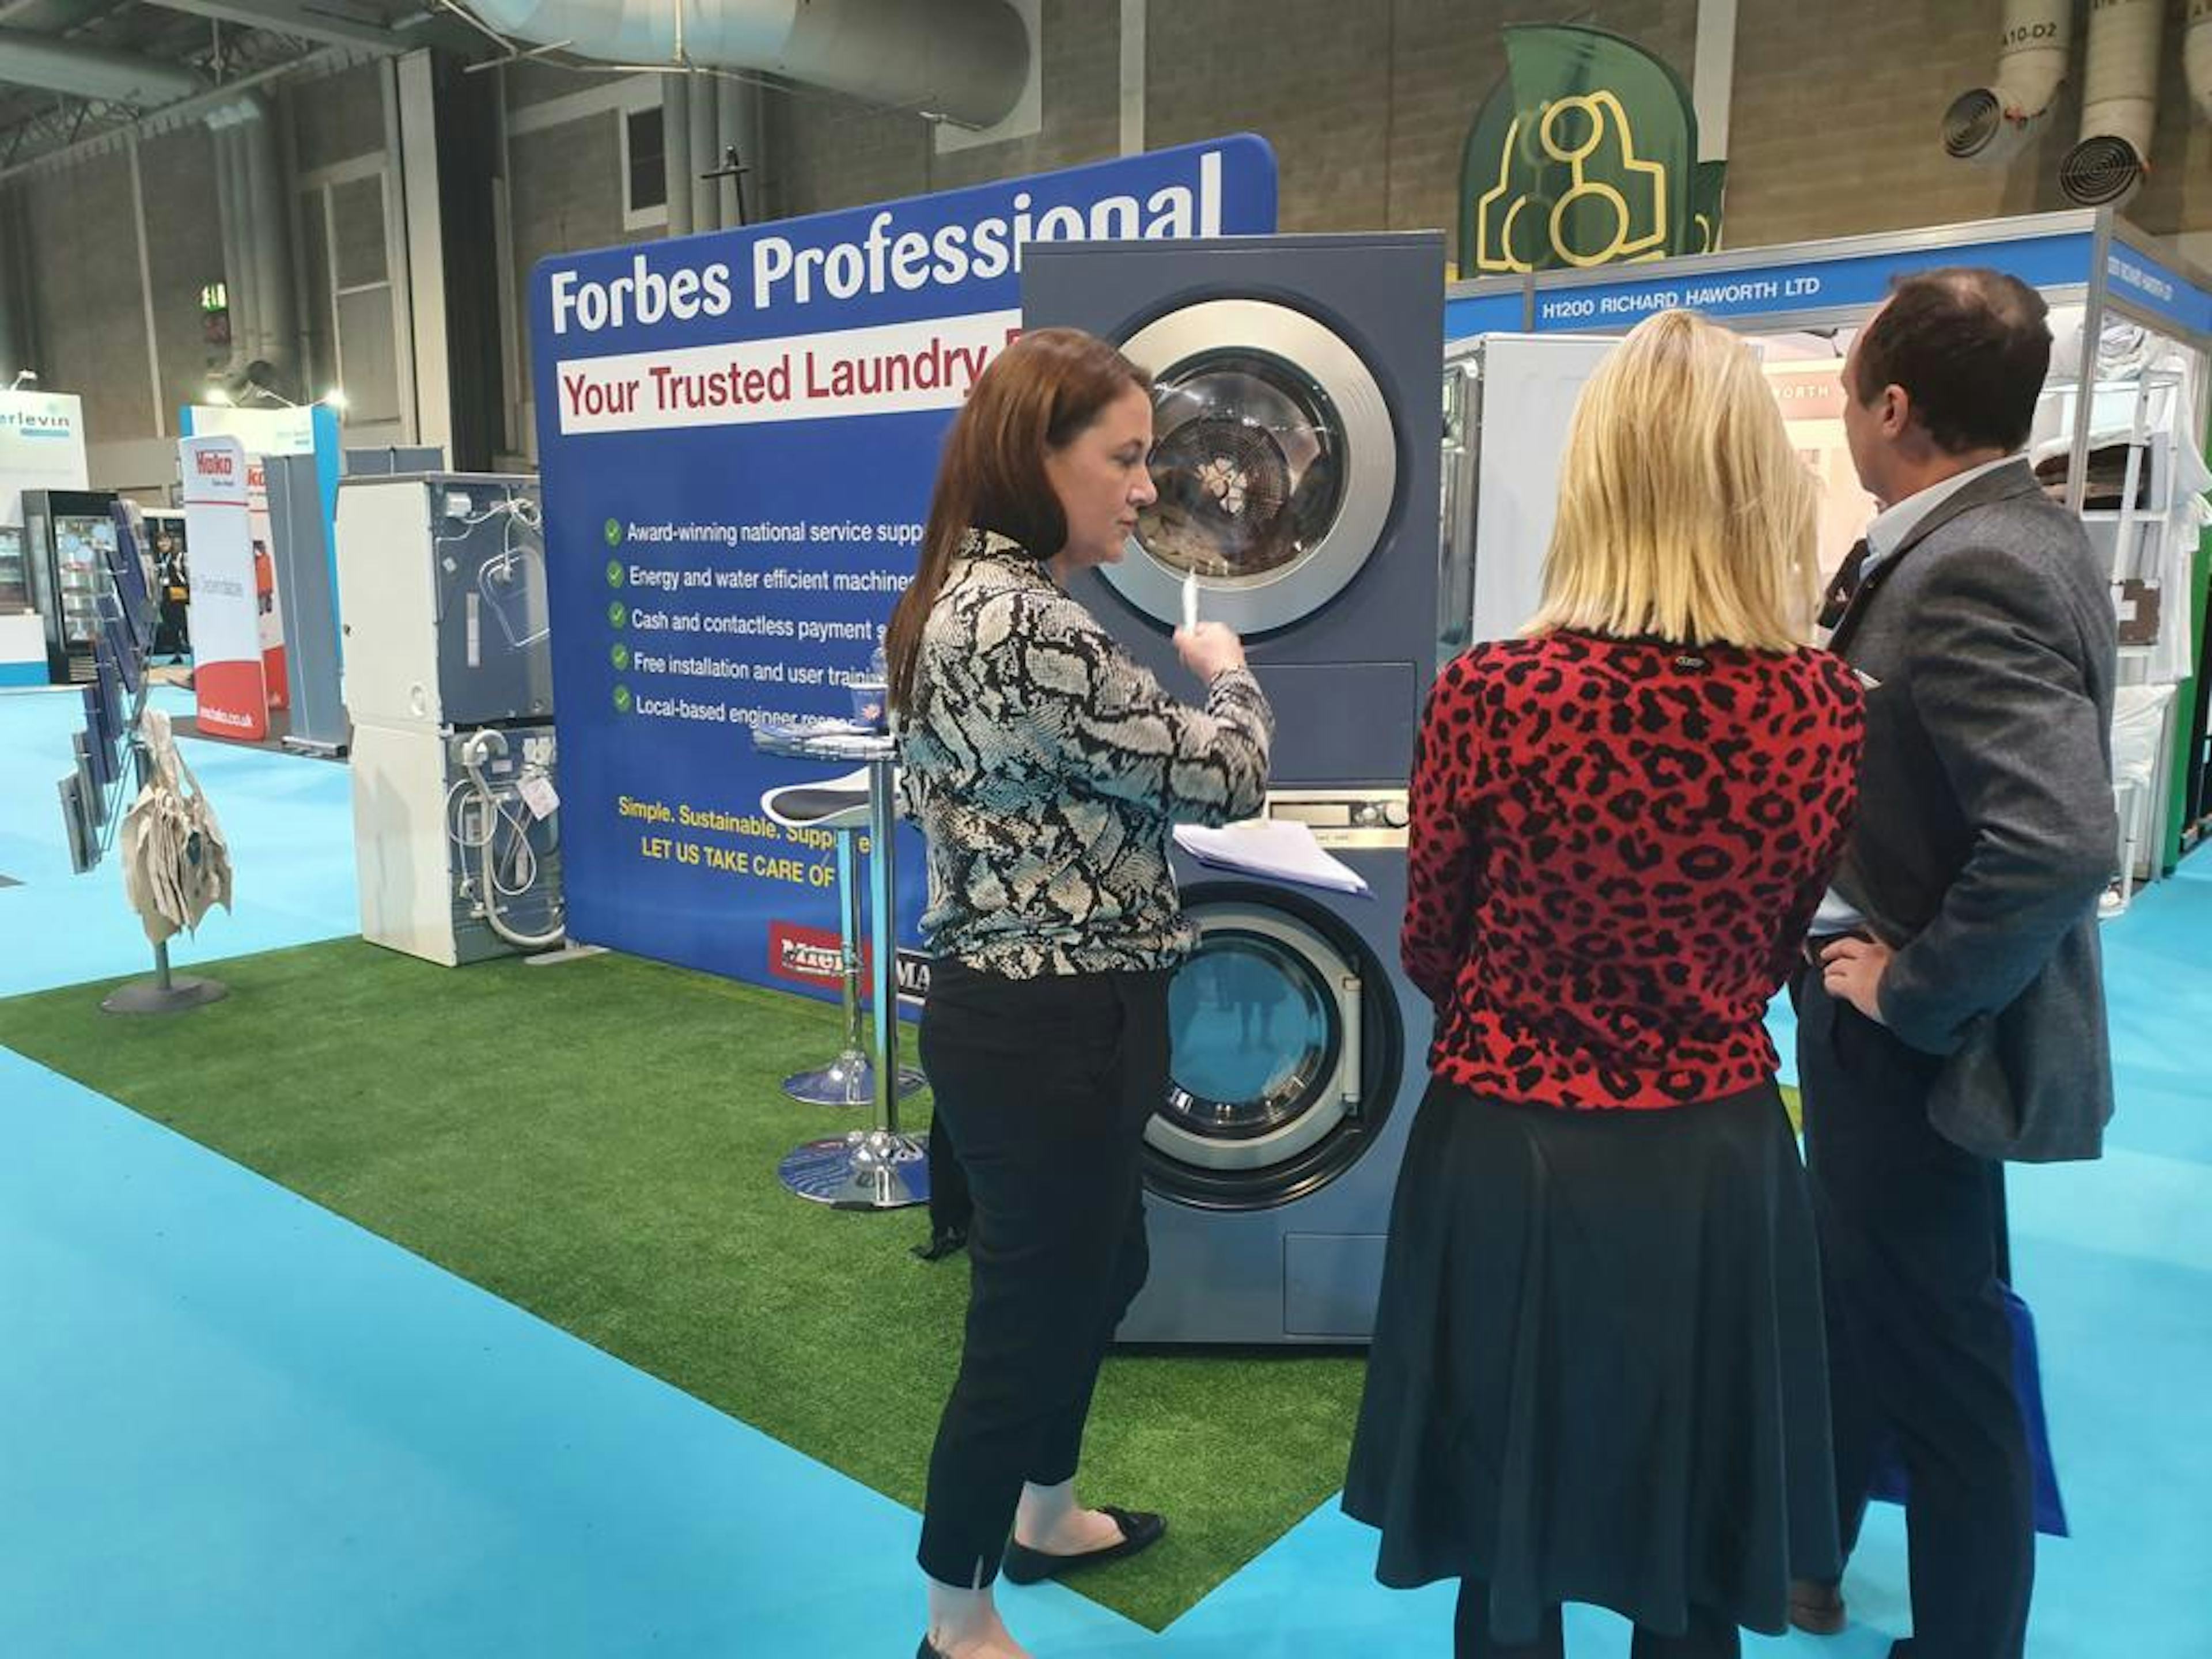 Maximising savings and efficiency through Forbes Professional's consultative laundry rental approach.